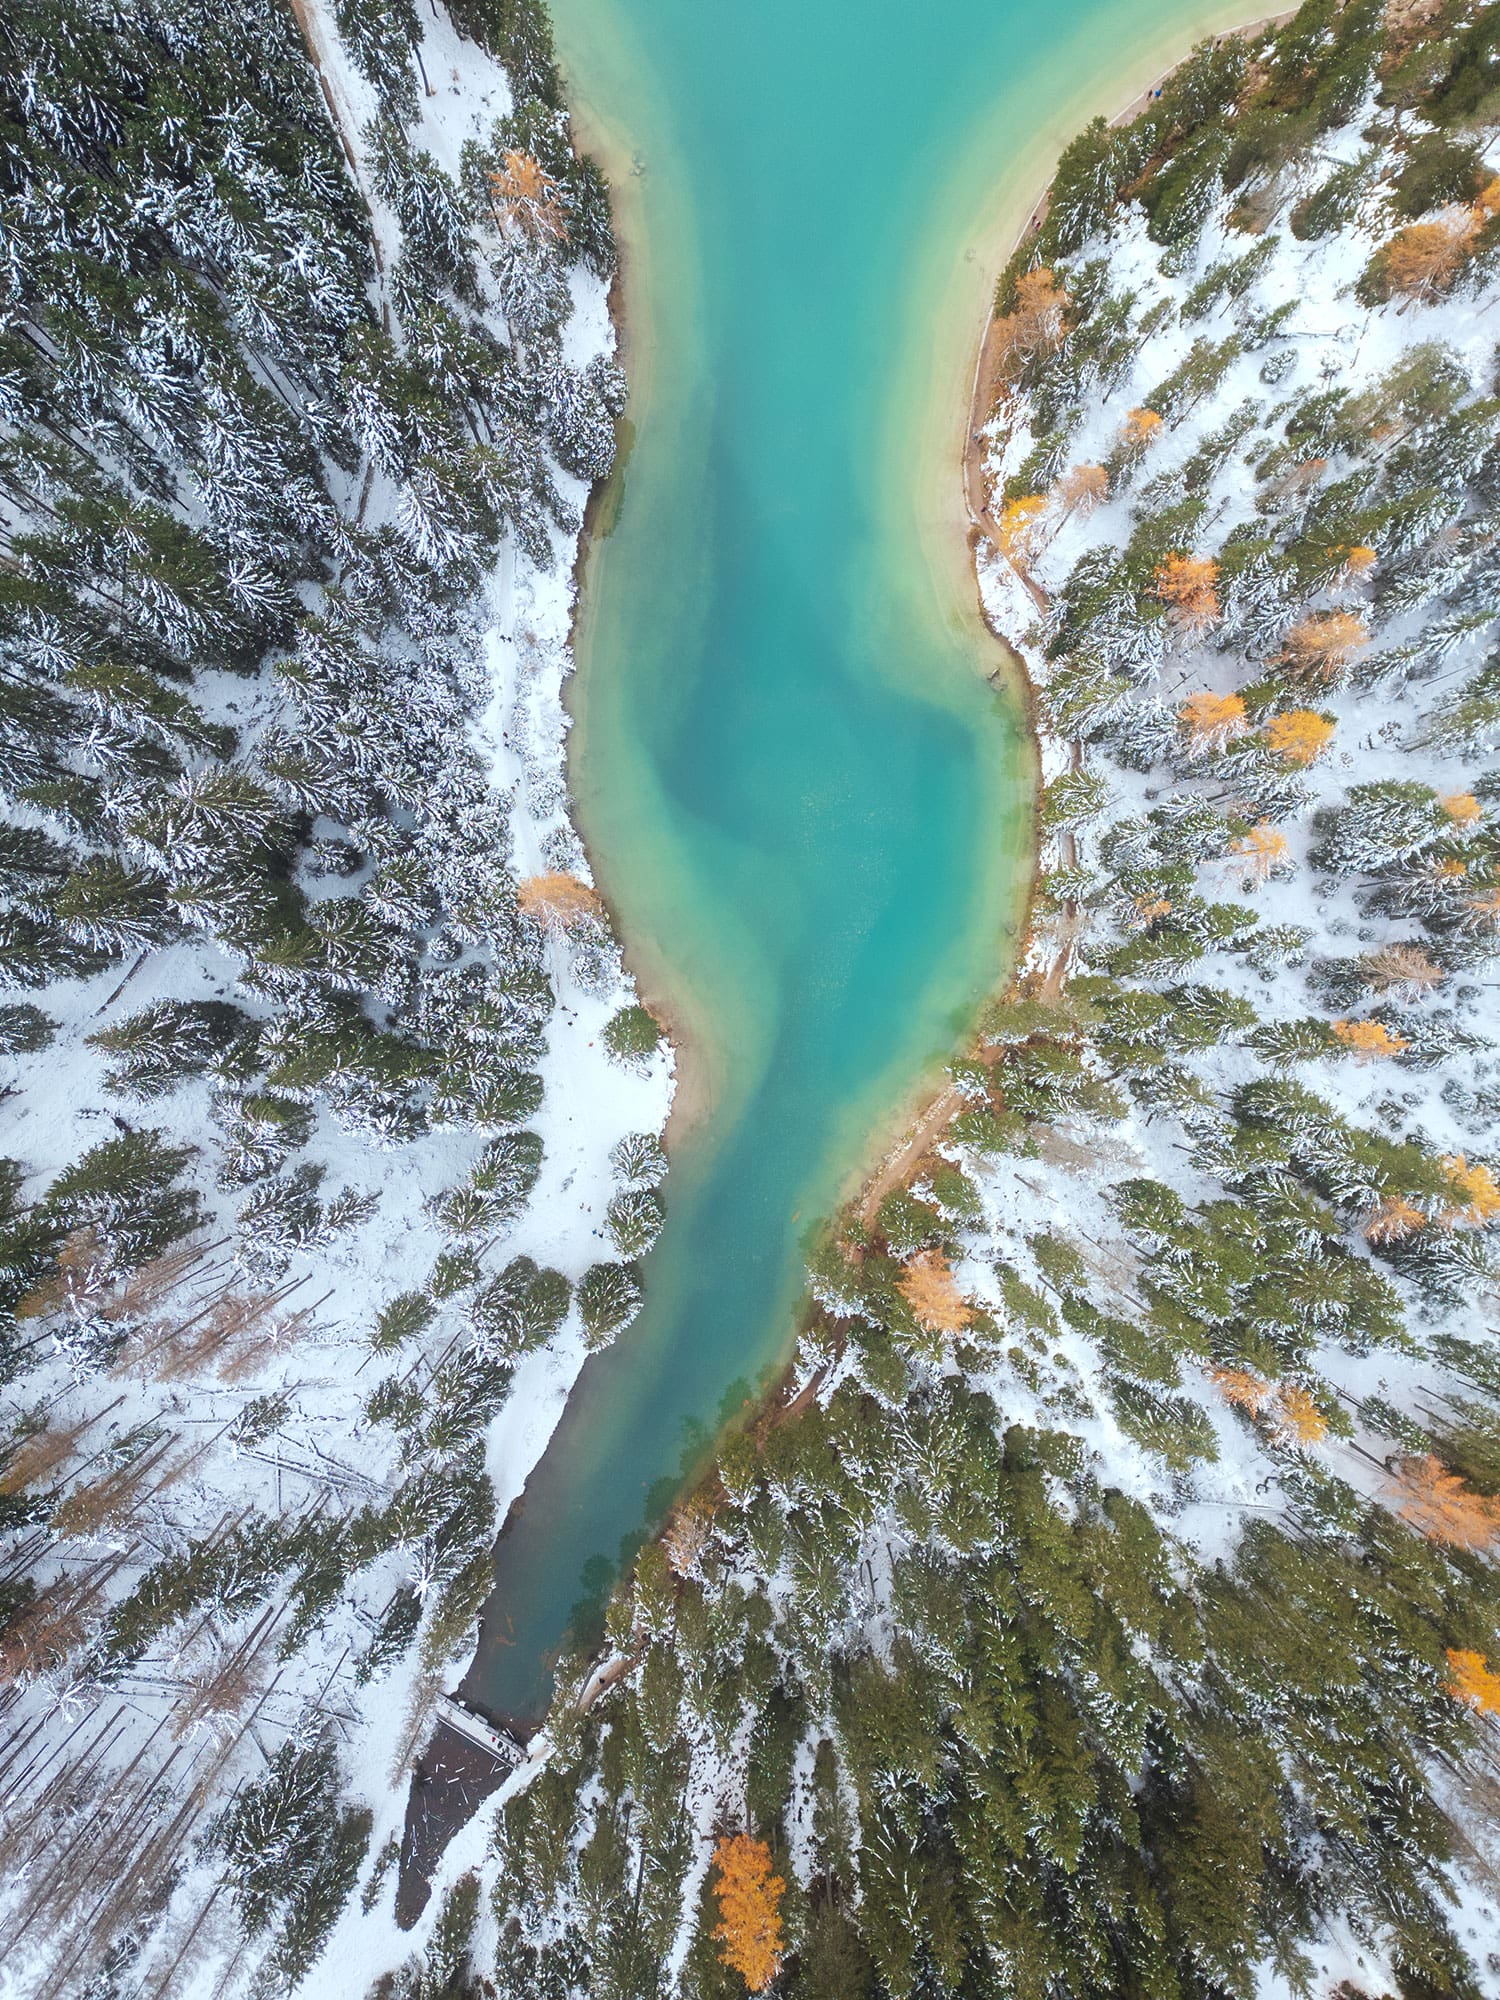 Experience the breathtaking beauty of Lago di Braies in the Dolomites through this stunning down drone shot captured by acclaimed landscape photographer Jennifer Esseiva using her DJI Mini 2. As the sun dips below the horizon, casting a golden glow across the landscape, the tranquil waters of the lake reflect the vibrant colors of the twilight sky. From this aerial perspective, viewers are treated to a sweeping view of the majestic mountains that surround the lake, creating a scene of unparalleled natural beauty. Jennifer Esseiva's expert composition and mastery of her drone camera ensure that every detail of this captivating sunset in the Dolomites is perfectly preserved, inviting viewers to immerse themselves in the serene atmosphere of this iconic location.